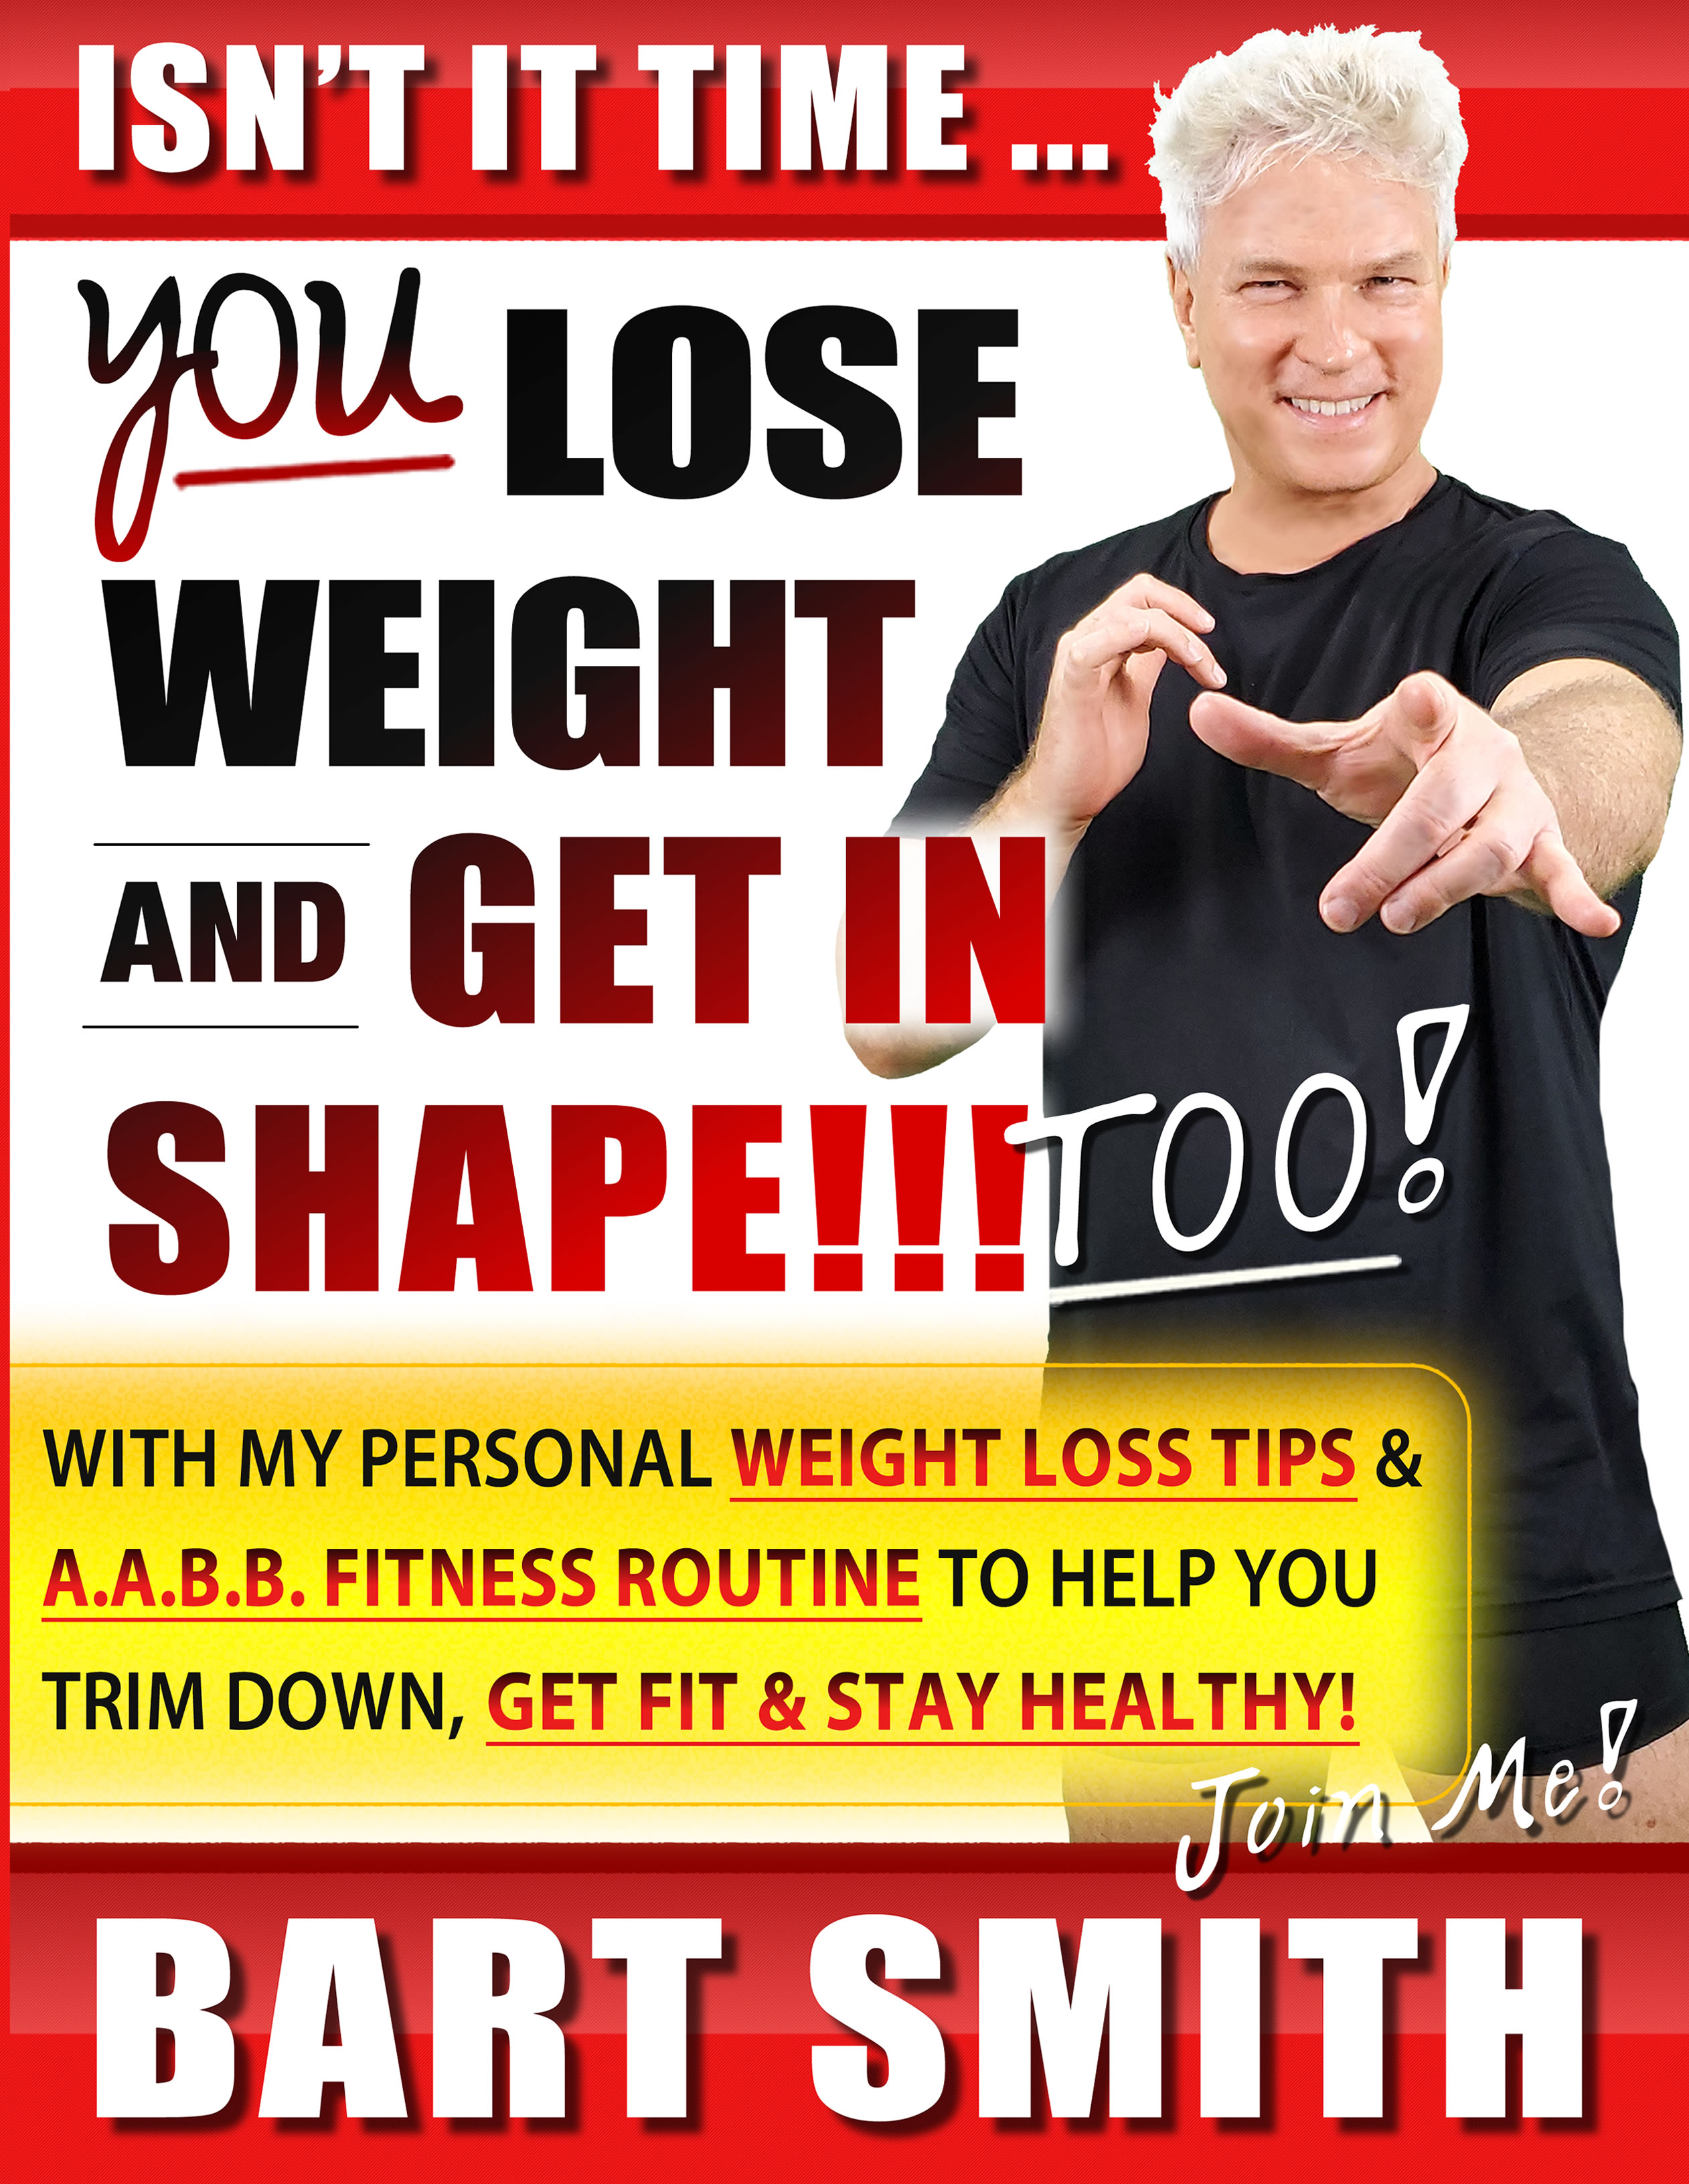 It's Time For You To Lose Weight & Get In Shape!!! TOO! With My Personal Weight Loss Tips & A.A.B.B. Fitness Routine To Help You Trim Down, Get Fit & Stay Healthy  by Bart Smith